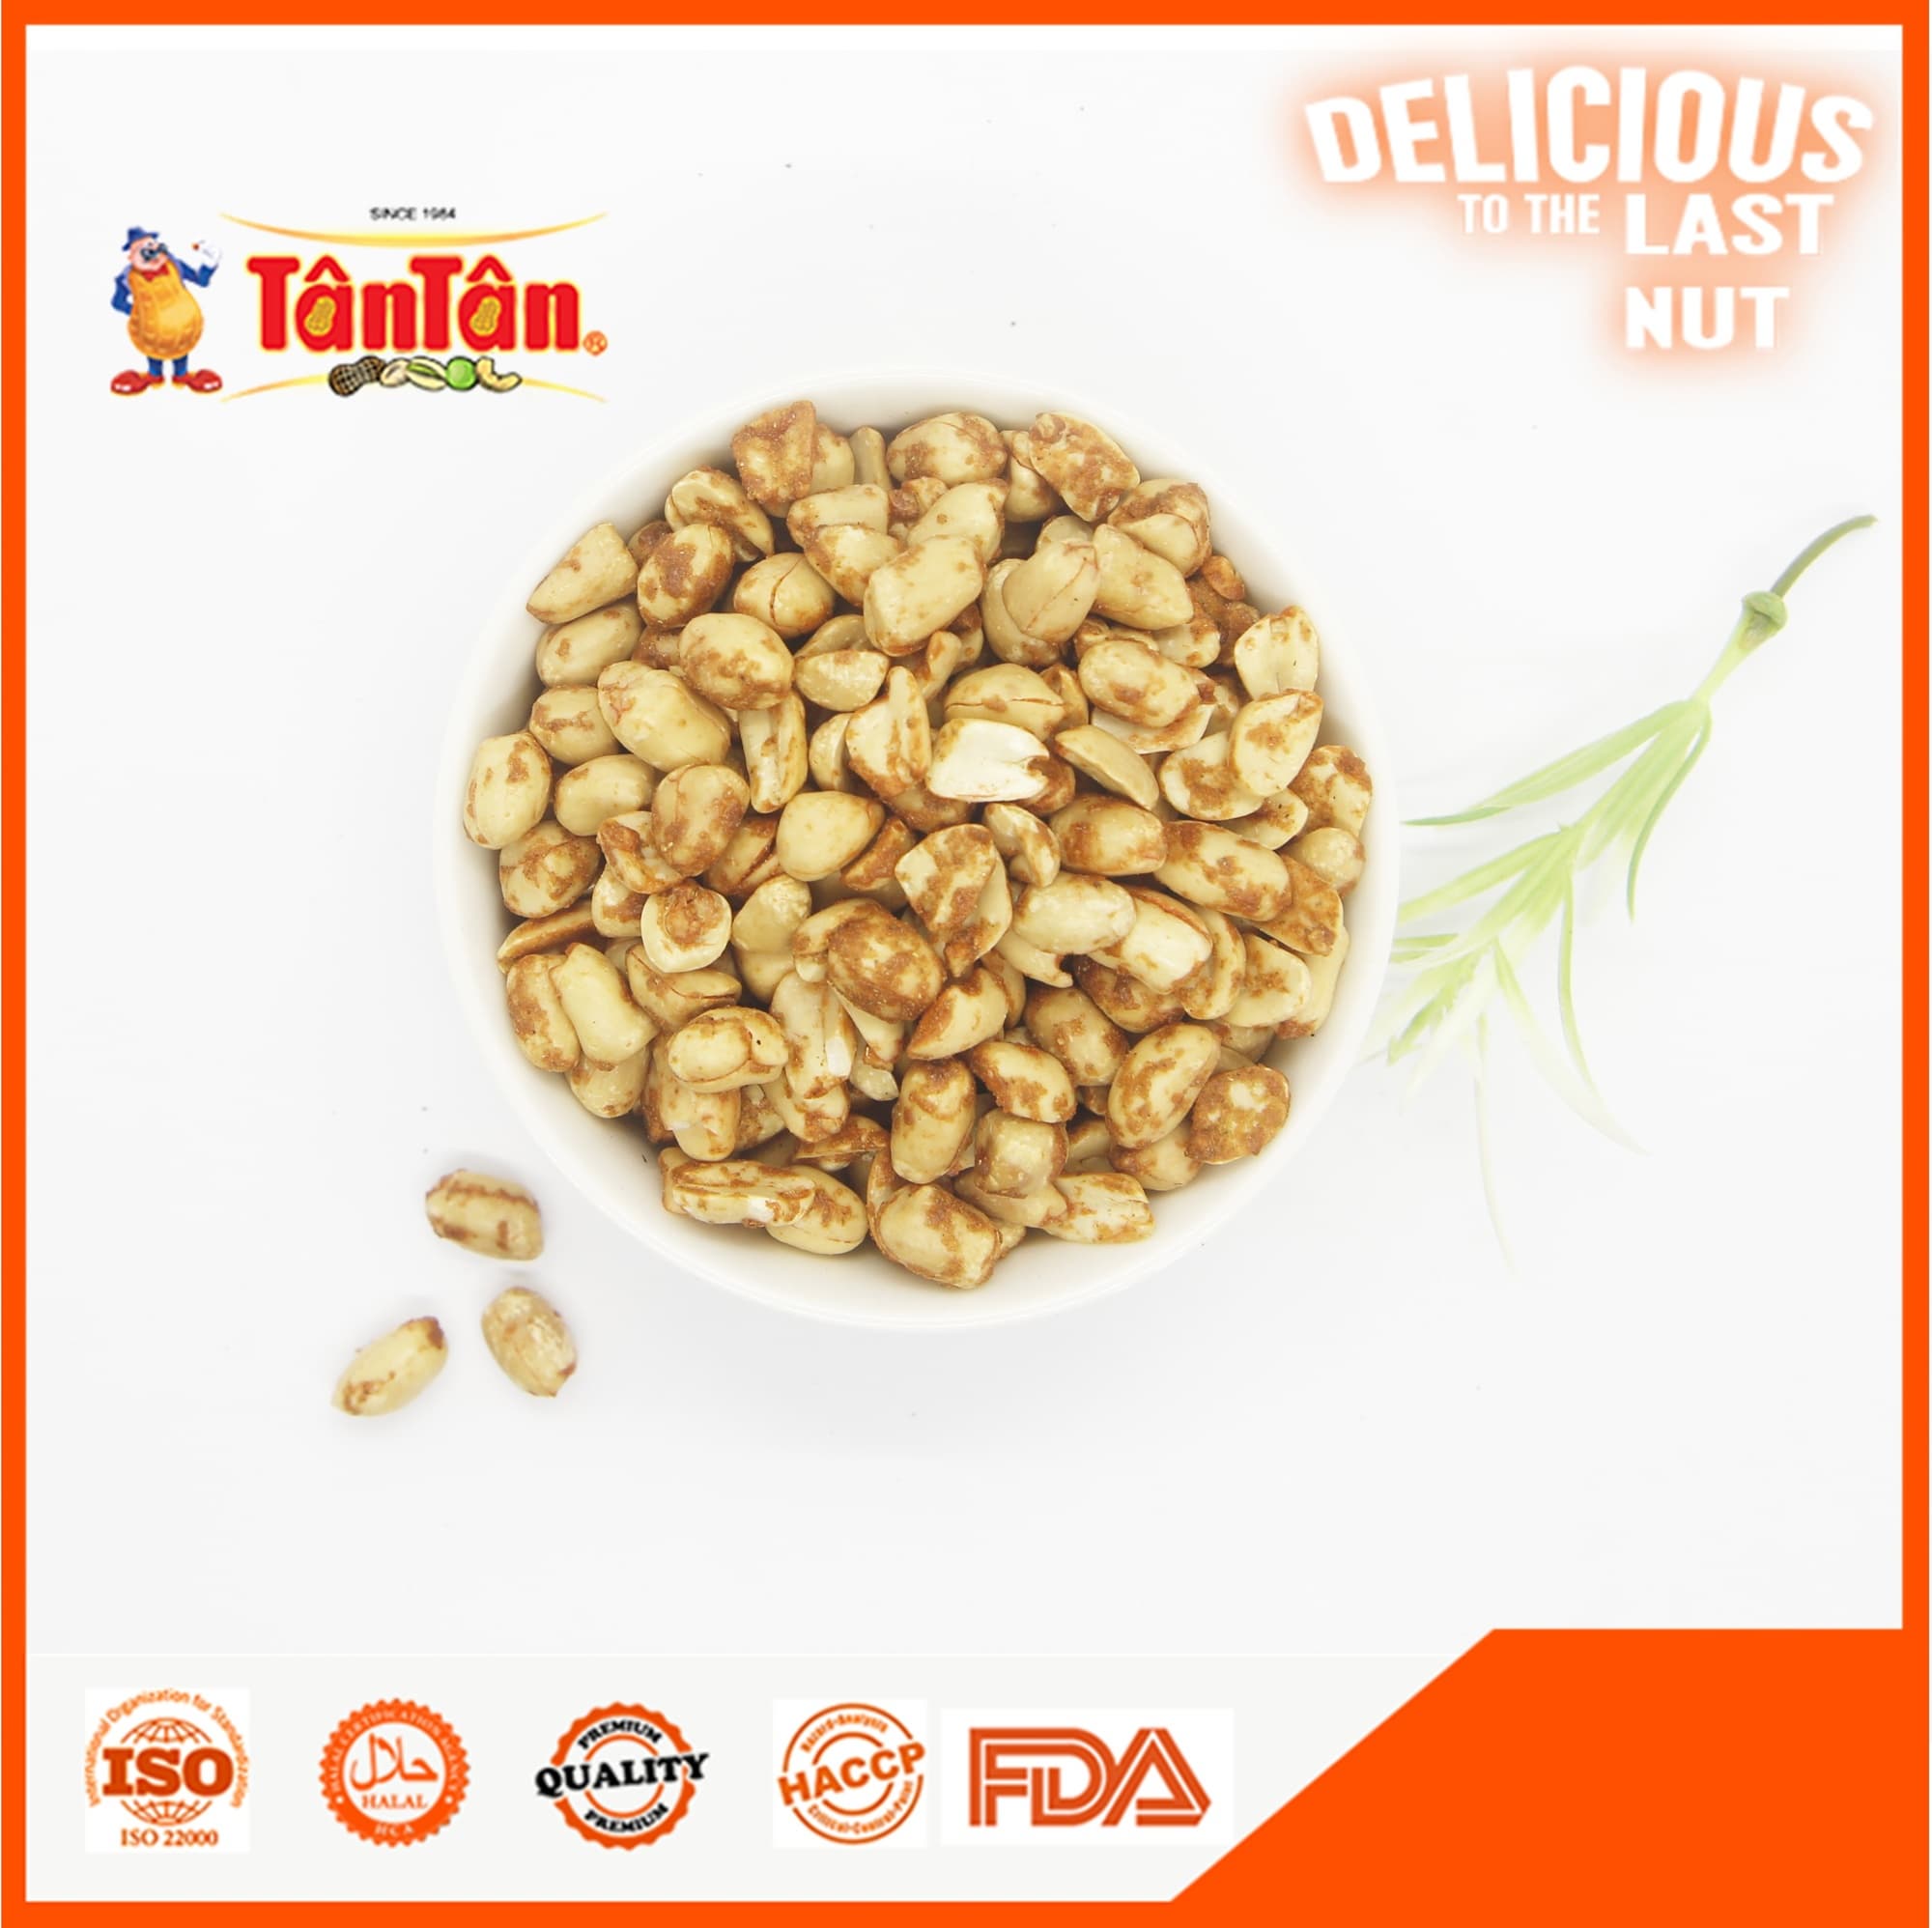 Peanuts with chili and lime _ spicy and fantastic flavor